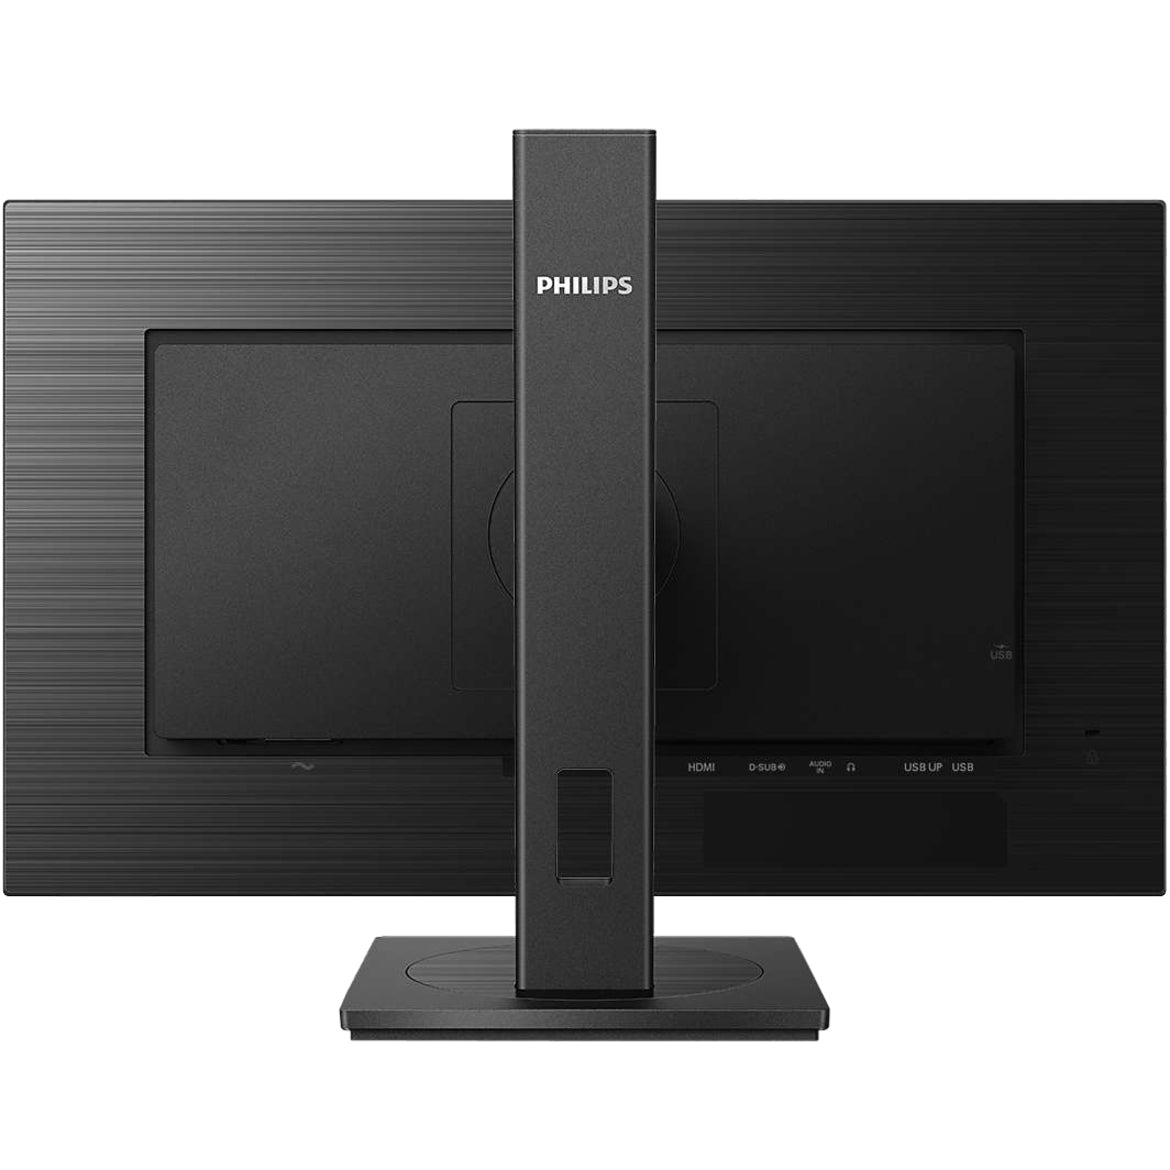 Philips 272B1G Business Monitor LCD Monitor with Super Energy Efficiency, 27" Full HD, Textured Black